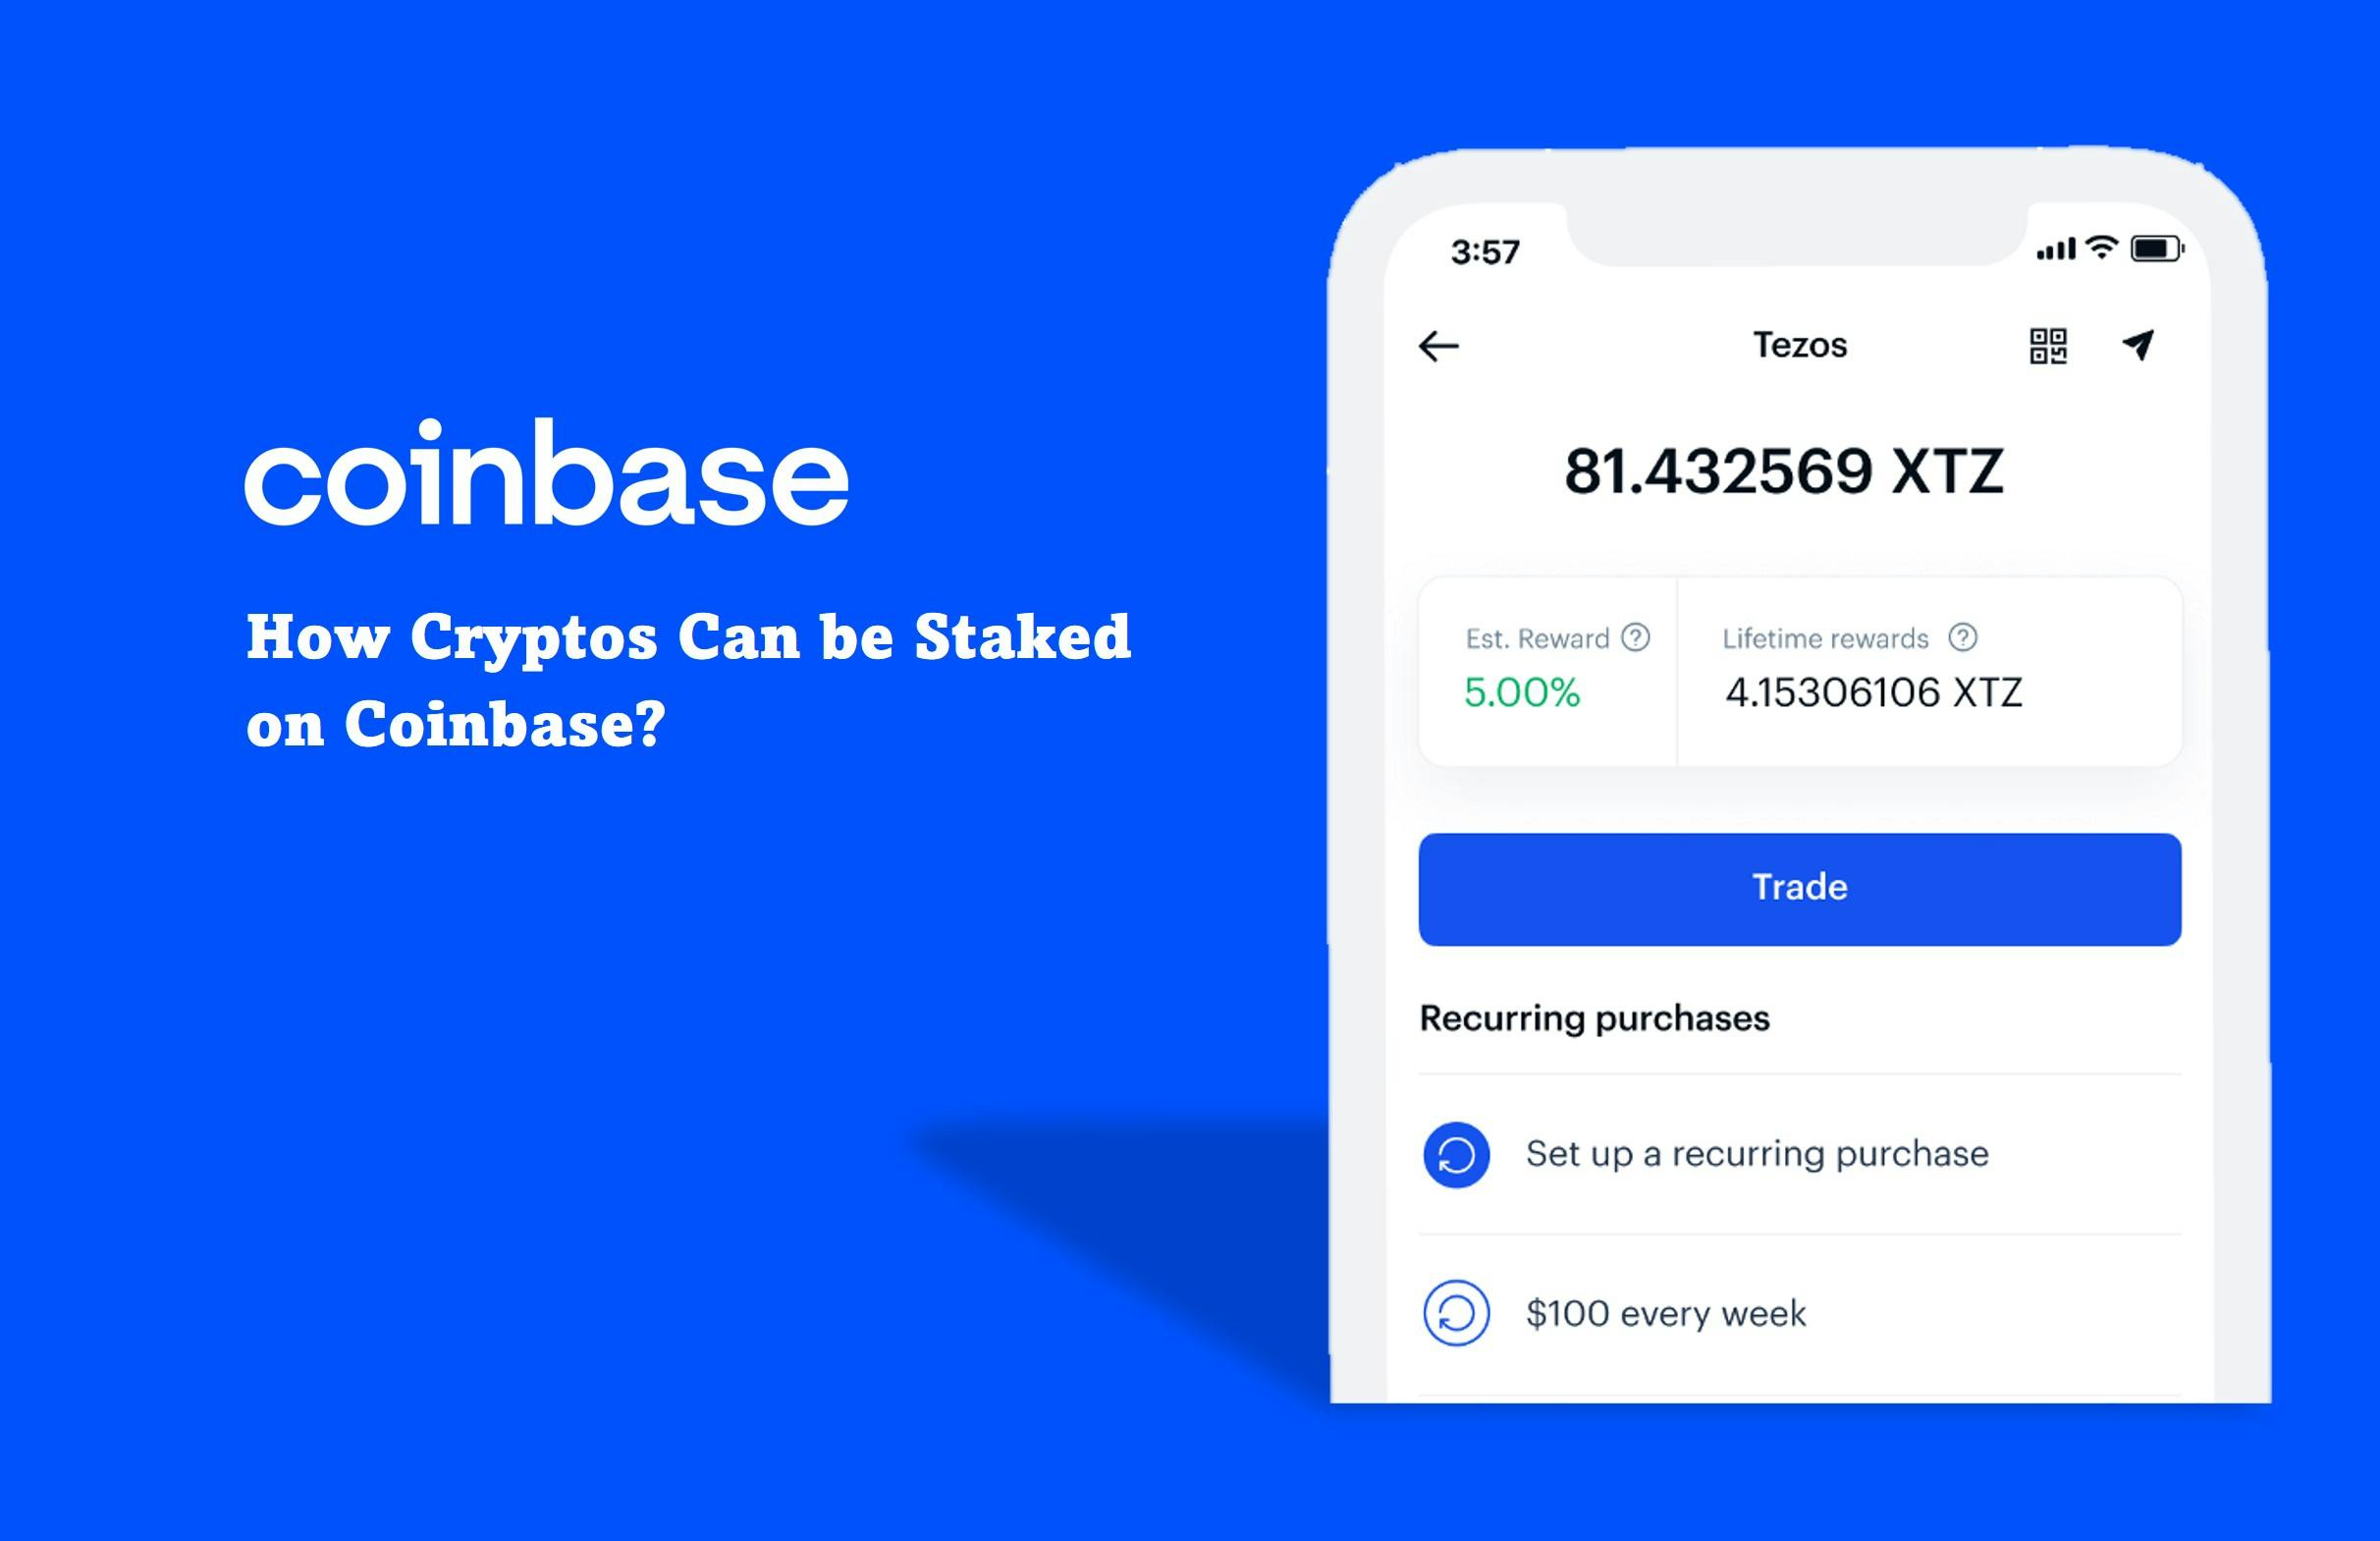 What Cryptos Can Be Staked On Coinbase